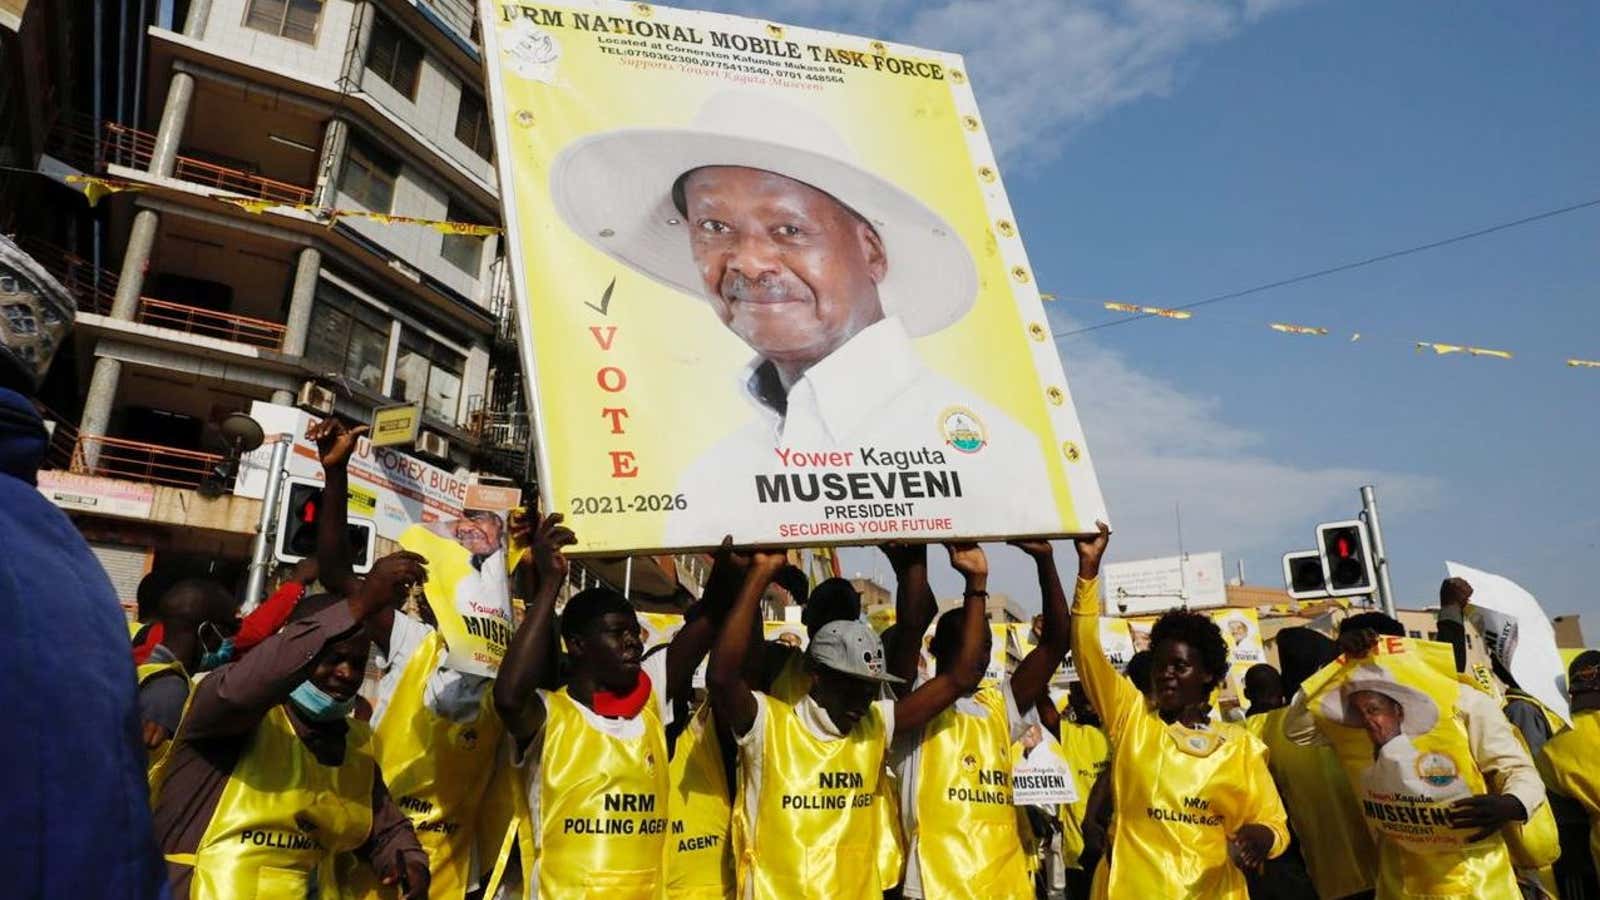 Polling agents from the National Resistance Movement (NRM) party celebrate the victory of Uganda’s president Yoweri Museveni in Kampala, Uganda Jan.16, 2021.